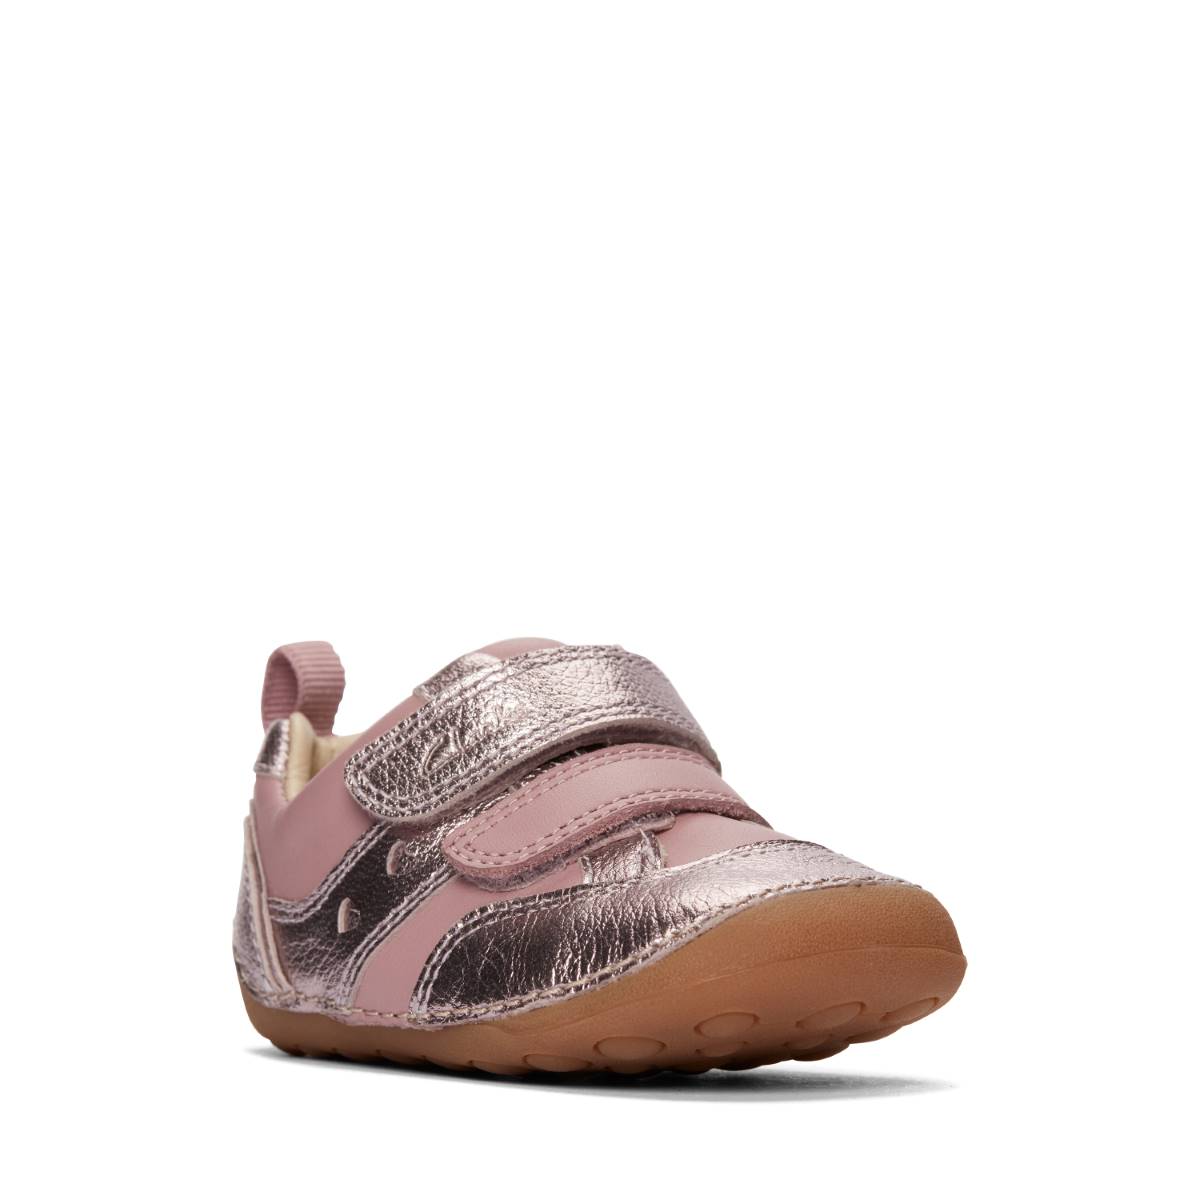 Clarks Tiny Sky T Blush Pink Kids girls first and baby shoes 7528-16F in a Plain Leather in Size 3